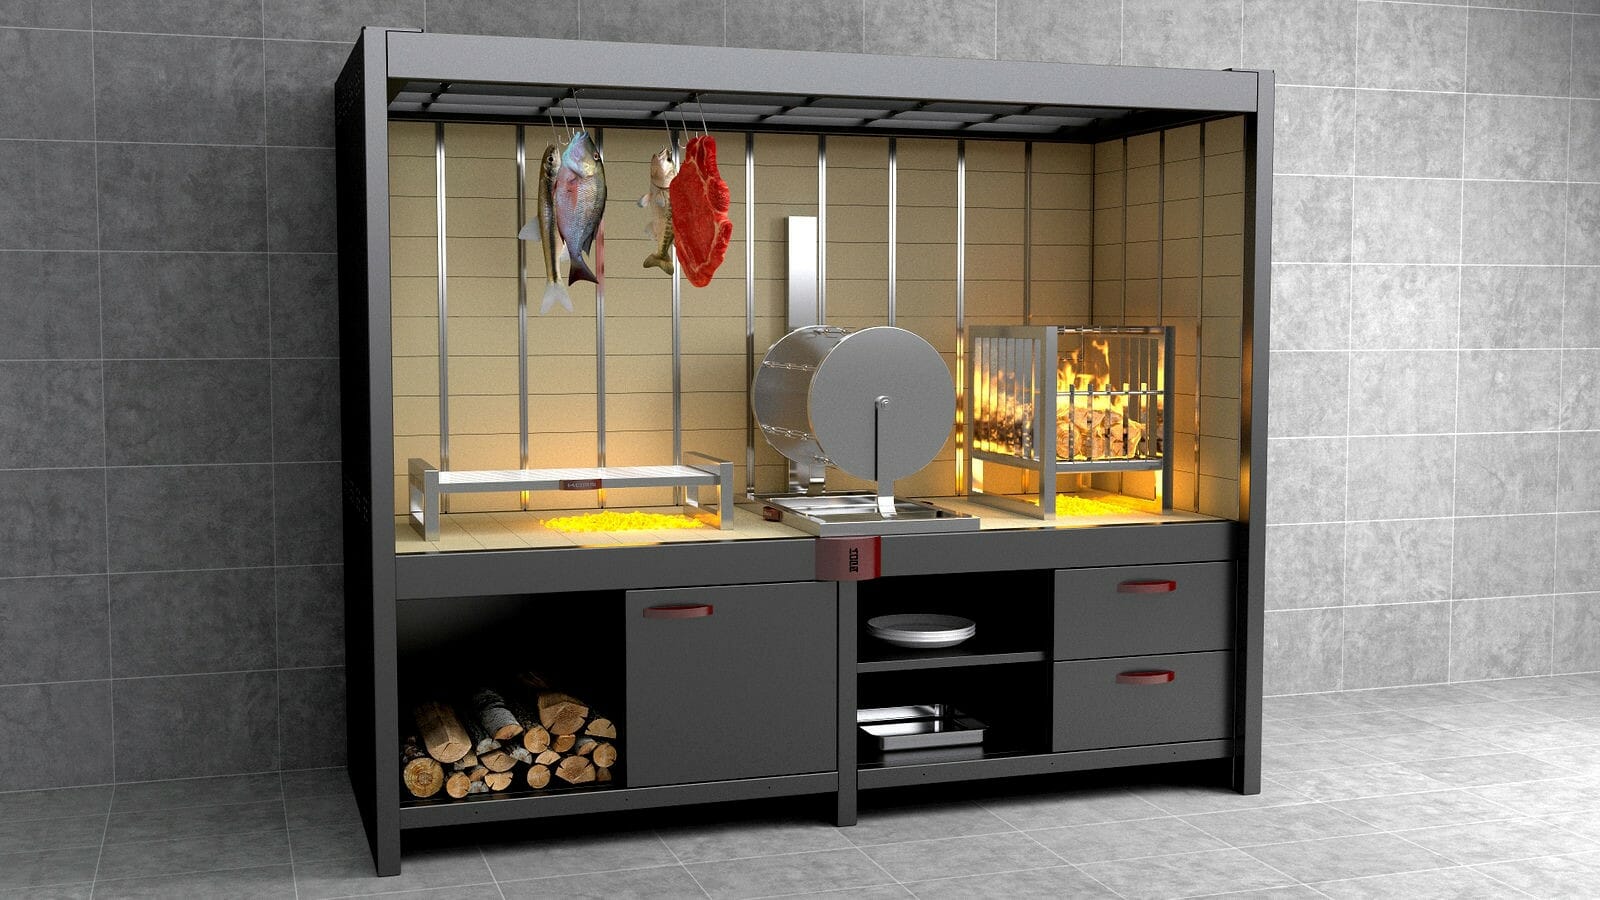 KOPA LAUNCHES NEW SELF-CONTAINED FIREPLACE COOKING STATION WITH MODULAR DESIGN FOR ULTIMATE FLEXIBILITY